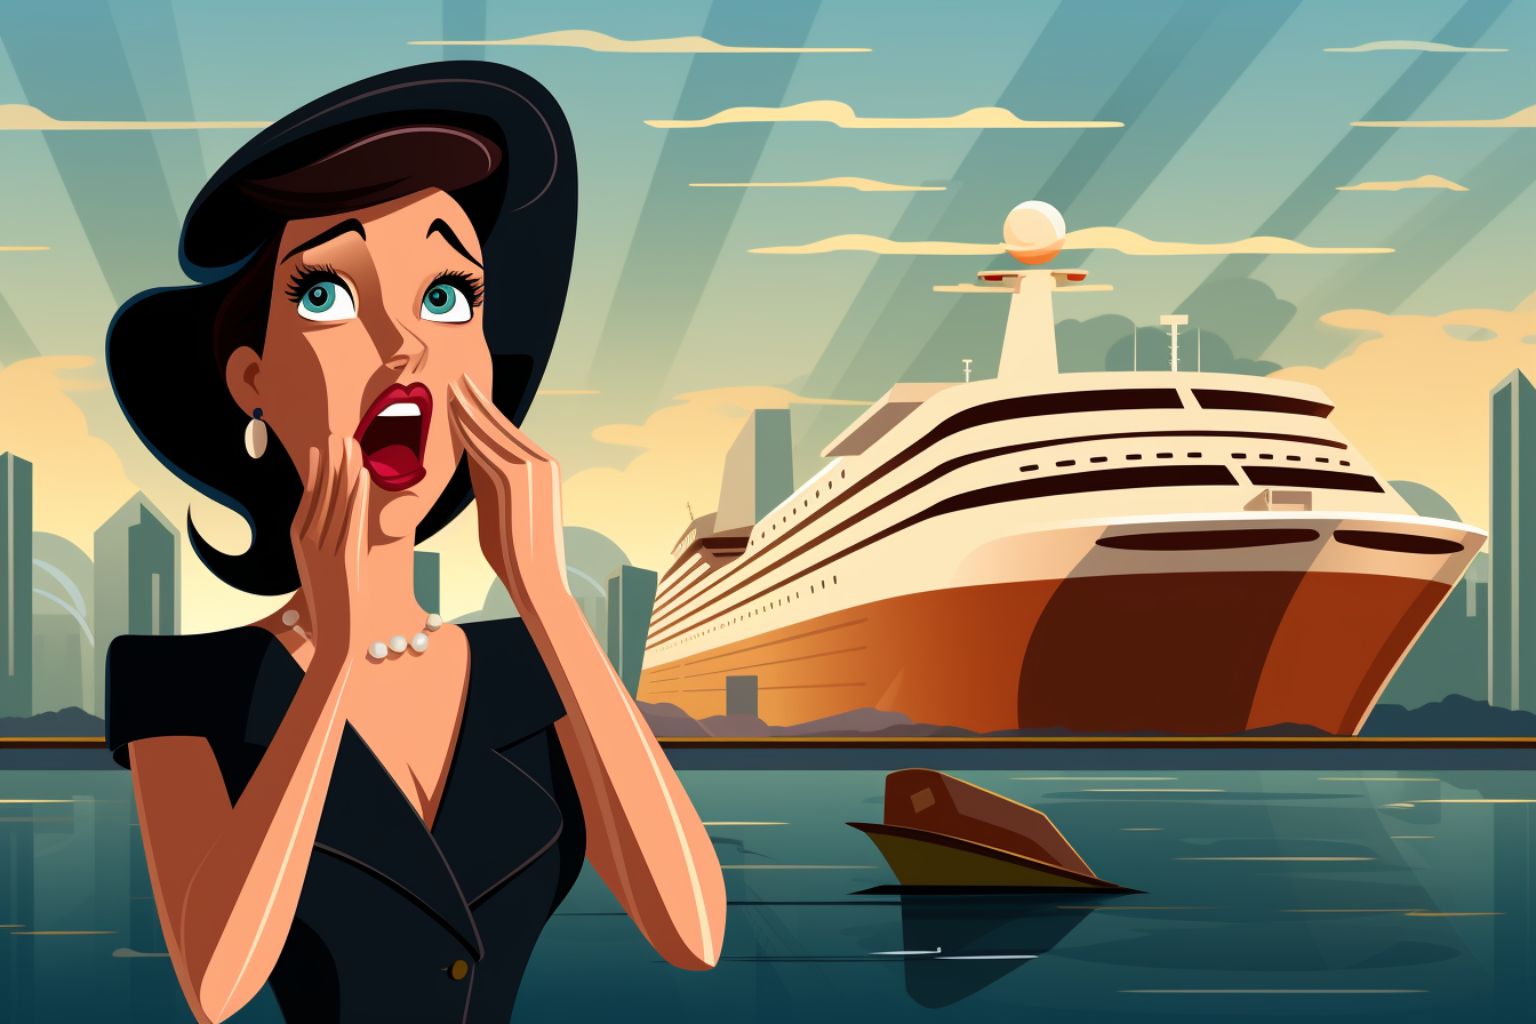 Lillian Kohler faced losing $36,000 after Vantage Travel's bankruptcy. Unlike others, she discovered a potential path to a refund. This story explores the complexities of cruise line bankruptcies and offers insights on protecting your travel investments, highlighting the crucial role of consumer advocacy in navigating these turbulent situations.